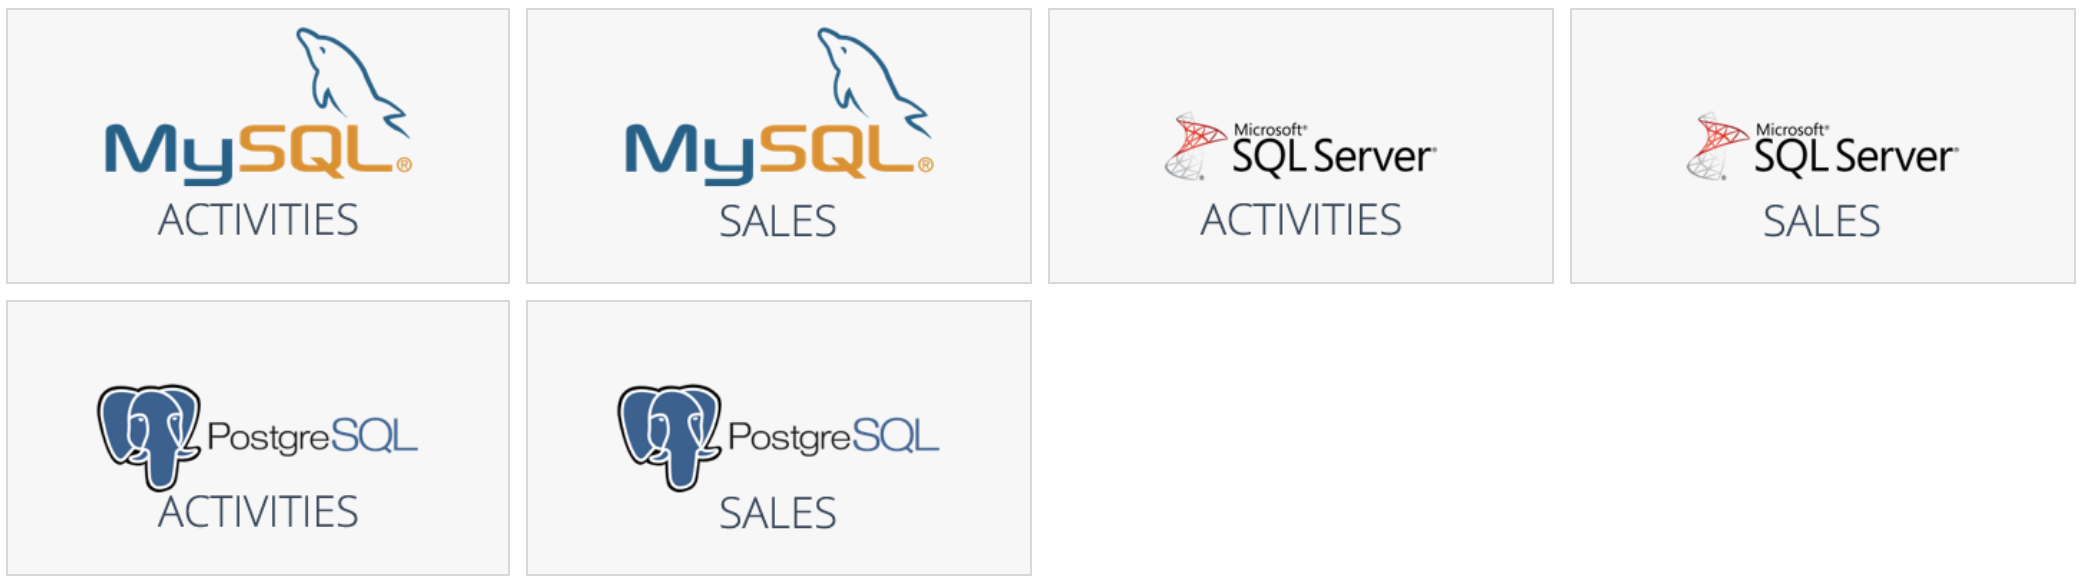 SQL_server_icons.png